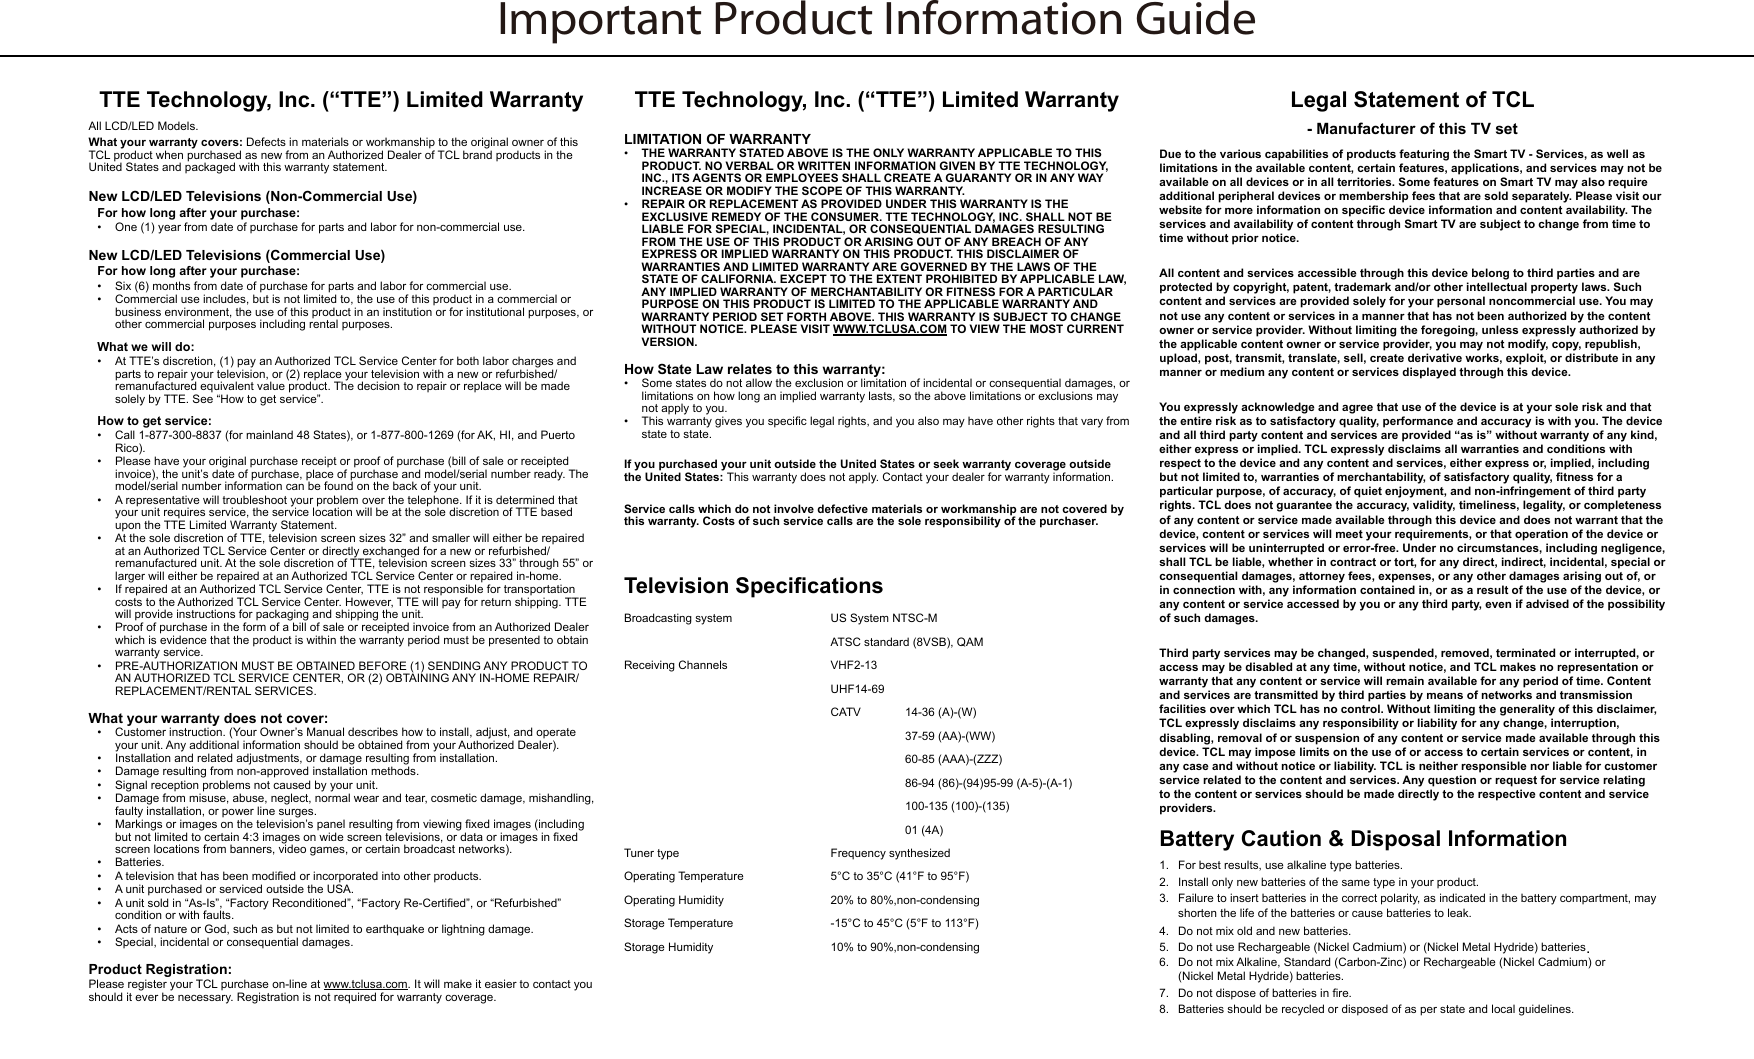 Important Product Information GuideTTE Technology, Inc. (“TTE”) Limited WarrantyAll LCD/LED Models.What your warranty covers: Defects in materials or workmanship to the original owner of this TCL product when purchased as new from an Authorized Dealer of TCL brand products in the United States and packaged with this warranty statement.New LCD/LED Televisions (Non-Commercial Use)For how long after your purchase:•  One (1) year from date of purchase for parts and labor for non-commercial use.New LCD/LED Televisions (Commercial Use)For how long after your purchase:•  Six (6) months from date of purchase for parts and labor for commercial use.•  Commercial use includes, but is not limited to, the use of this product in a commercial or business environment, the use of this product in an institution or for institutional purposes, or other commercial purposes including rental purposes.What we will do:•  At TTE’s discretion, (1) pay an Authorized TCL Service Center for both labor charges and parts to repair your television, or (2) replace your television with a new or refurbished/remanufactured equivalent value product. The decision to repair or replace will be made solely by TTE. See “How to get service”.How to get service:•  Call 1-877-300-8837 (for mainland 48 States), or 1-877-800-1269 (for AK, HI, and Puerto Rico).•  Please have your original purchase receipt or proof of purchase (bill of sale or receipted invoice), the unit’s date of purchase, place of purchase and model/serial number ready. The model/serial number information can be found on the back of your unit.•  A representative will troubleshoot your problem over the telephone. If it is determined that your unit requires service, the service location will be at the sole discretion of TTE based upon the TTE Limited Warranty Statement.•  At the sole discretion of TTE, television screen sizes 32” and smaller will either be repaired at an Authorized TCL Service Center or directly exchanged for a new or refurbished/remanufactured unit. At the sole discretion of TTE, television screen sizes 33” through 55” or larger will either be repaired at an Authorized TCL Service Center or repaired in-home.•  If repaired at an Authorized TCL Service Center, TTE is not responsible for transportation costs to the Authorized TCL Service Center. However, TTE will pay for return shipping. TTE will provide instructions for packaging and shipping the unit.•  Proof of purchase in the form of a bill of sale or receipted invoice from an Authorized Dealer which is evidence that the product is within the warranty period must be presented to obtain warranty service.•  PRE-AUTHORIZATION MUST BE OBTAINED BEFORE (1) SENDING ANY PRODUCT TO AN AUTHORIZED TCL SERVICE CENTER, OR (2) OBTAINING ANY IN-HOME REPAIR/REPLACEMENT/RENTAL SERVICES.What your warranty does not cover:•  Customer instruction. (Your Owner’s Manual describes how to install, adjust, and operate your unit. Any additional information should be obtained from your Authorized Dealer).•  Installation and related adjustments, or damage resulting from installation.•  Damage resulting from non-approved installation methods.•  Signal reception problems not caused by your unit.•  Damage from misuse, abuse, neglect, normal wear and tear, cosmetic damage, mishandling, faulty installation, or power line surges.•  Markings or images on the television’s panel resulting from viewing xed images (including but not limited to certain 4:3 images on wide screen televisions, or data or images in xed screen locations from banners, video games, or certain broadcast networks).•  Batteries.•  A television that has been modied or incorporated into other products.•  A unit purchased or serviced outside the USA.•  A unit sold in “As-Is”, “Factory Reconditioned”, “Factory Re-Certied”, or “Refurbished” condition or with faults.•  Acts of nature or God, such as but not limited to earthquake or lightning damage.•  Special, incidental or consequential damages.Product Registration:Please register your TCL purchase on-line at www.tclusa.com. It will make it easier to contact you should it ever be necessary. Registration is not required for warranty coverage.TTE Technology, Inc. (“TTE”) Limited WarrantyLIMITATION OF WARRANTY•  THE WARRANTY STATED ABOVE IS THE ONLY WARRANTY APPLICABLE TO THIS PRODUCT. NO VERBAL OR WRITTEN INFORMATION GIVEN BY TTE TECHNOLOGY, INC., ITS AGENTS OR EMPLOYEES SHALL CREATE A GUARANTY OR IN ANY WAY INCREASE OR MODIFY THE SCOPE OF THIS WARRANTY.•  REPAIR OR REPLACEMENT AS PROVIDED UNDER THIS WARRANTY IS THE EXCLUSIVE REMEDY OF THE CONSUMER. TTE TECHNOLOGY, INC. SHALL NOT BE LIABLE FOR SPECIAL, INCIDENTAL, OR CONSEQUENTIAL DAMAGES RESULTING FROM THE USE OF THIS PRODUCT OR ARISING OUT OF ANY BREACH OF ANY EXPRESS OR IMPLIED WARRANTY ON THIS PRODUCT. THIS DISCLAIMER OF WARRANTIES AND LIMITED WARRANTY ARE GOVERNED BY THE LAWS OF THE STATE OF CALIFORNIA. EXCEPT TO THE EXTENT PROHIBITED BY APPLICABLE LAW, ANY IMPLIED WARRANTY OF MERCHANTABILITY OR FITNESS FOR A PARTICULAR PURPOSE ON THIS PRODUCT IS LIMITED TO THE APPLICABLE WARRANTY AND WARRANTY PERIOD SET FORTH ABOVE. THIS WARRANTY IS SUBJECT TO CHANGE WITHOUT NOTICE. PLEASE VISIT WWW.TCLUSA.COM TO VIEW THE MOST CURRENT VERSION.How State Law relates to this warranty:•  Some states do not allow the exclusion or limitation of incidental or consequential damages, or limitations on how long an implied warranty lasts, so the above limitations or exclusions may not apply to you.•  This warranty gives you specic legal rights, and you also may have other rights that vary from state to state.If you purchased your unit outside the United States or seek warranty coverage outside the United States: This warranty does not apply. Contact your dealer for warranty information.Service calls which do not involve defective materials or workmanship are not covered by this warranty. Costs of such service calls are the sole responsibility of the purchaser.Television SpecicationsBroadcasting system  US System NTSC-MATSC standard (8VSB), QAMReceiving Channels  VHF2-13UHF14-69CATV  14-36 (A)-(W)37-59 (AA)-(WW)60-85 (AAA)-(ZZZ)86-94 (86)-(94)95-99 (A-5)-(A-1)100-135 (100)-(135)01 (4A)Tuner type  Frequency synthesizedOperating Temperature 5°C to 35°C (41°F to 95°F)Operating Humidity 20% to 80%,non-condensingStorage Temperature -15°C to 45°C (5°F to 113°F)Storage Humidity 10% to 90%,non-condensingLegal Statement of TCL - Manufacturer of this TV setDue to the various capabilities of products featuring the Smart TV - Services, as well as limitations in the available content, certain features, applications, and services may not be available on all devices or in all territories. Some features on Smart TV may also require additional peripheral devices or membership fees that are sold separately. Please visit our website for more information on specic device information and content availability. The services and availability of content through Smart TV are subject to change from time to time without prior notice.All content and services accessible through this device belong to third parties and are protected by copyright, patent, trademark and/or other intellectual property laws. Such content and services are provided solely for your personal noncommercial use. You may not use any content or services in a manner that has not been authorized by the content owner or service provider. Without limiting the foregoing, unless expressly authorized by the applicable content owner or service provider, you may not modify, copy, republish, upload, post, transmit, translate, sell, create derivative works, exploit, or distribute in any manner or medium any content or services displayed through this device.You expressly acknowledge and agree that use of the device is at your sole risk and that the entire risk as to satisfactory quality, performance and accuracy is with you. The device and all third party content and services are provided “as is” without warranty of any kind, either express or implied. TCL expressly disclaims all warranties and conditions with respect to the device and any content and services, either express or, implied, including but not limited to, warranties of merchantability, of satisfactory quality, tness for a particular purpose, of accuracy, of quiet enjoyment, and non-infringement of third party rights. TCL does not guarantee the accuracy, validity, timeliness, legality, or completeness of any content or service made available through this device and does not warrant that the device, content or services will meet your requirements, or that operation of the device or services will be uninterrupted or error-free. Under no circumstances, including negligence, shall TCL be liable, whether in contract or tort, for any direct, indirect, incidental, special or consequential damages, attorney fees, expenses, or any other damages arising out of, or in connection with, any information contained in, or as a result of the use of the device, or any content or service accessed by you or any third party, even if advised of the possibility of such damages.Third party services may be changed, suspended, removed, terminated or interrupted, or access may be disabled at any time, without notice, and TCL makes no representation or warranty that any content or service will remain available for any period of time. Content and services are transmitted by third parties by means of networks and transmission facilities over which TCL has no control. Without limiting the generality of this disclaimer, TCL expressly disclaims any responsibility or liability for any change, interruption, disabling, removal of or suspension of any content or service made available through this device. TCL may impose limits on the use of or access to certain services or content, in any case and without notice or liability. TCL is neither responsible nor liable for customer service related to the content and services. Any question or request for service relating to the content or services should be made directly to the respective content and service providers.Battery Caution &amp; Disposal Information1.  For best results, use alkaline type batteries.2.  Install only new batteries of the same type in your product.3.  Failure to insert batteries in the correct polarity, as indicated in the battery compartment, may    shorten the life of the batteries or cause batteries to leak.4.  Do not mix old and new batteries.5.  Do not use Rechargeable (Nickel Cadmium) or (Nickel Metal Hydride) batteries.6.  Do not mix Alkaline, Standard (Carbon-Zinc) or Rechargeable (Nickel Cadmium) or     (Nickel Metal Hydride) batteries.7.  Do not dispose of batteries in re.8.  Batteries should be recycled or disposed of as per state and local guidelines.